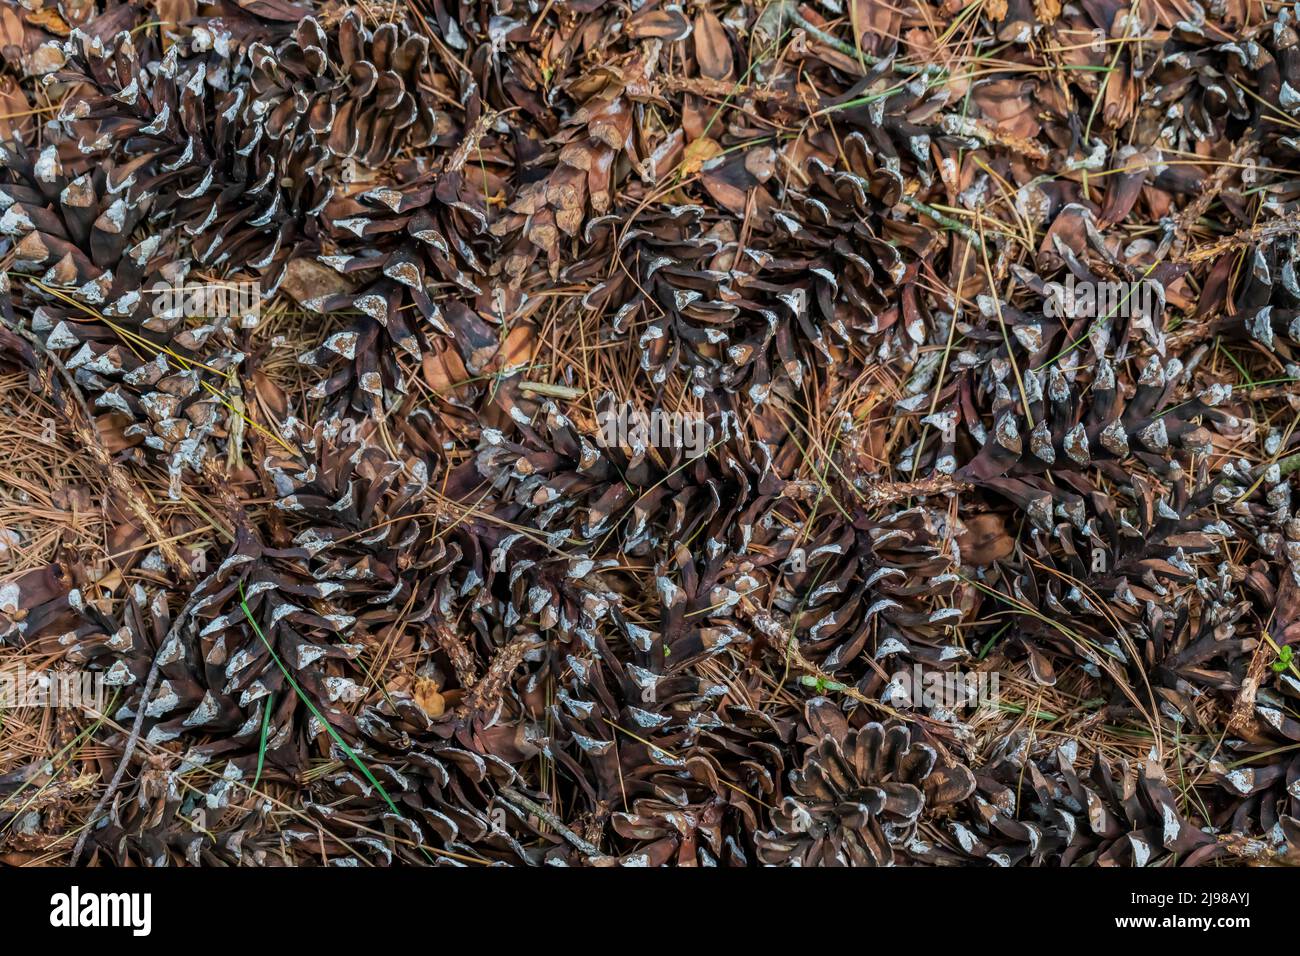 Eastern White Pine, Pinus strobus, cones and needles on forest floor in central Michigan, USA Stock Photo